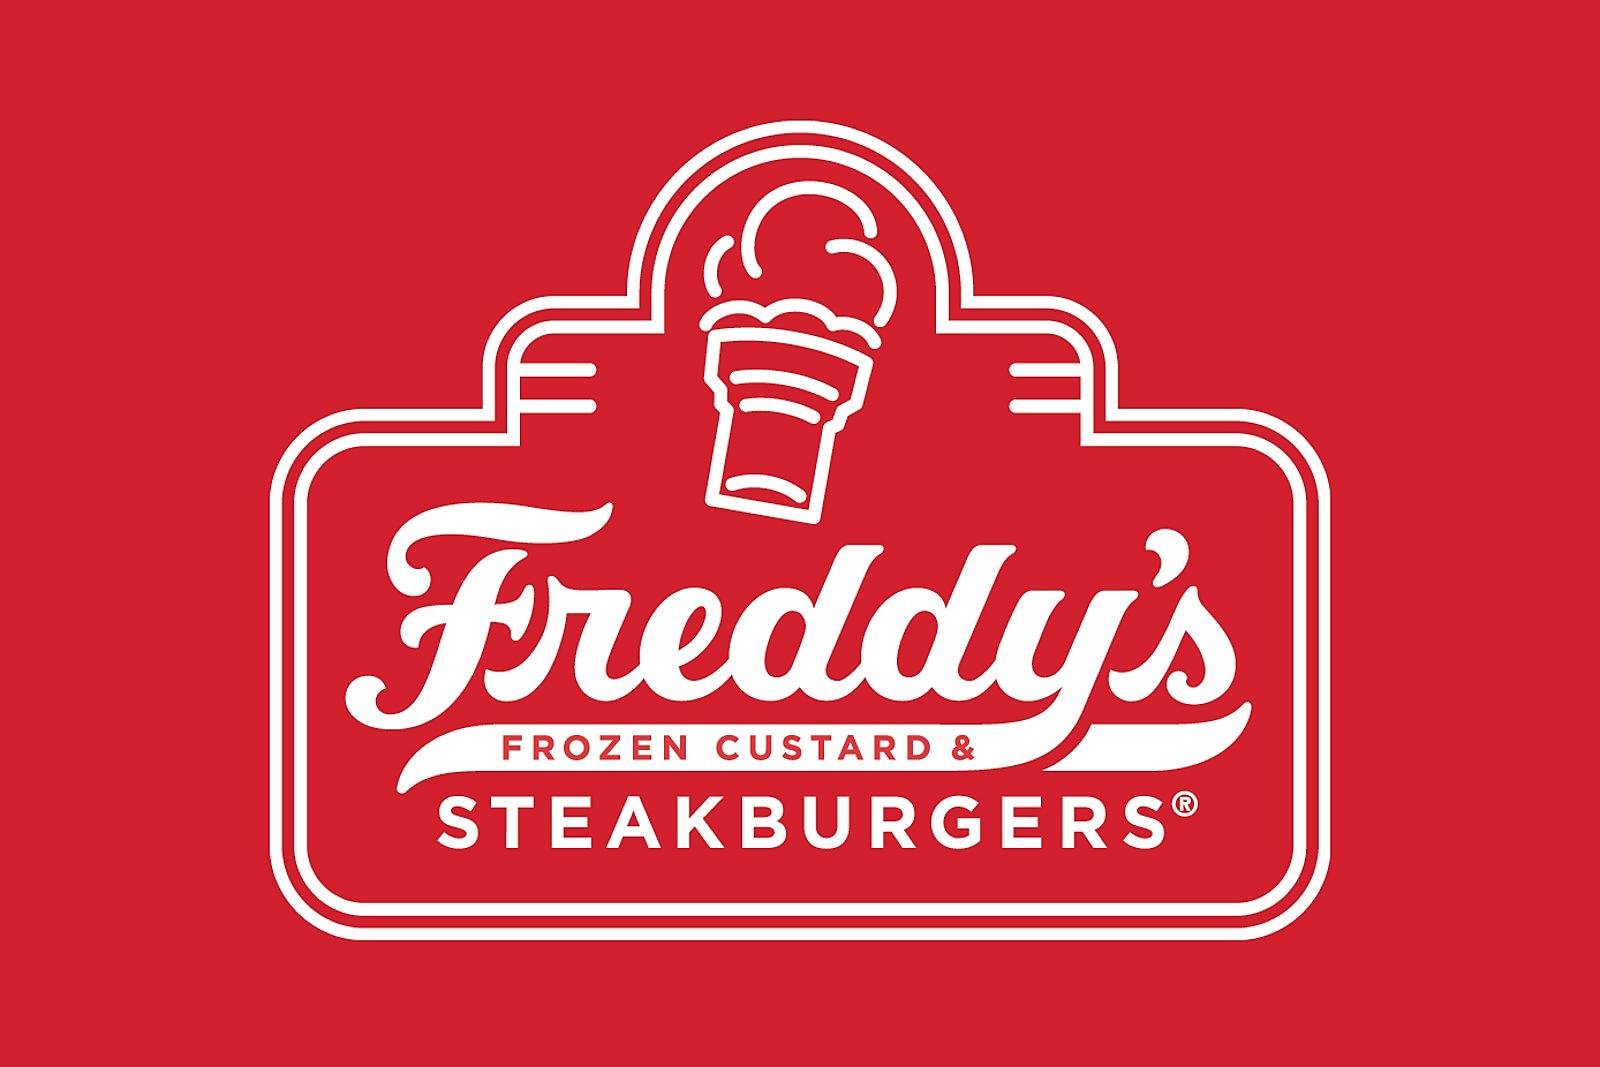 Freddy's opens second Clarksville location on Tuesday, this one on